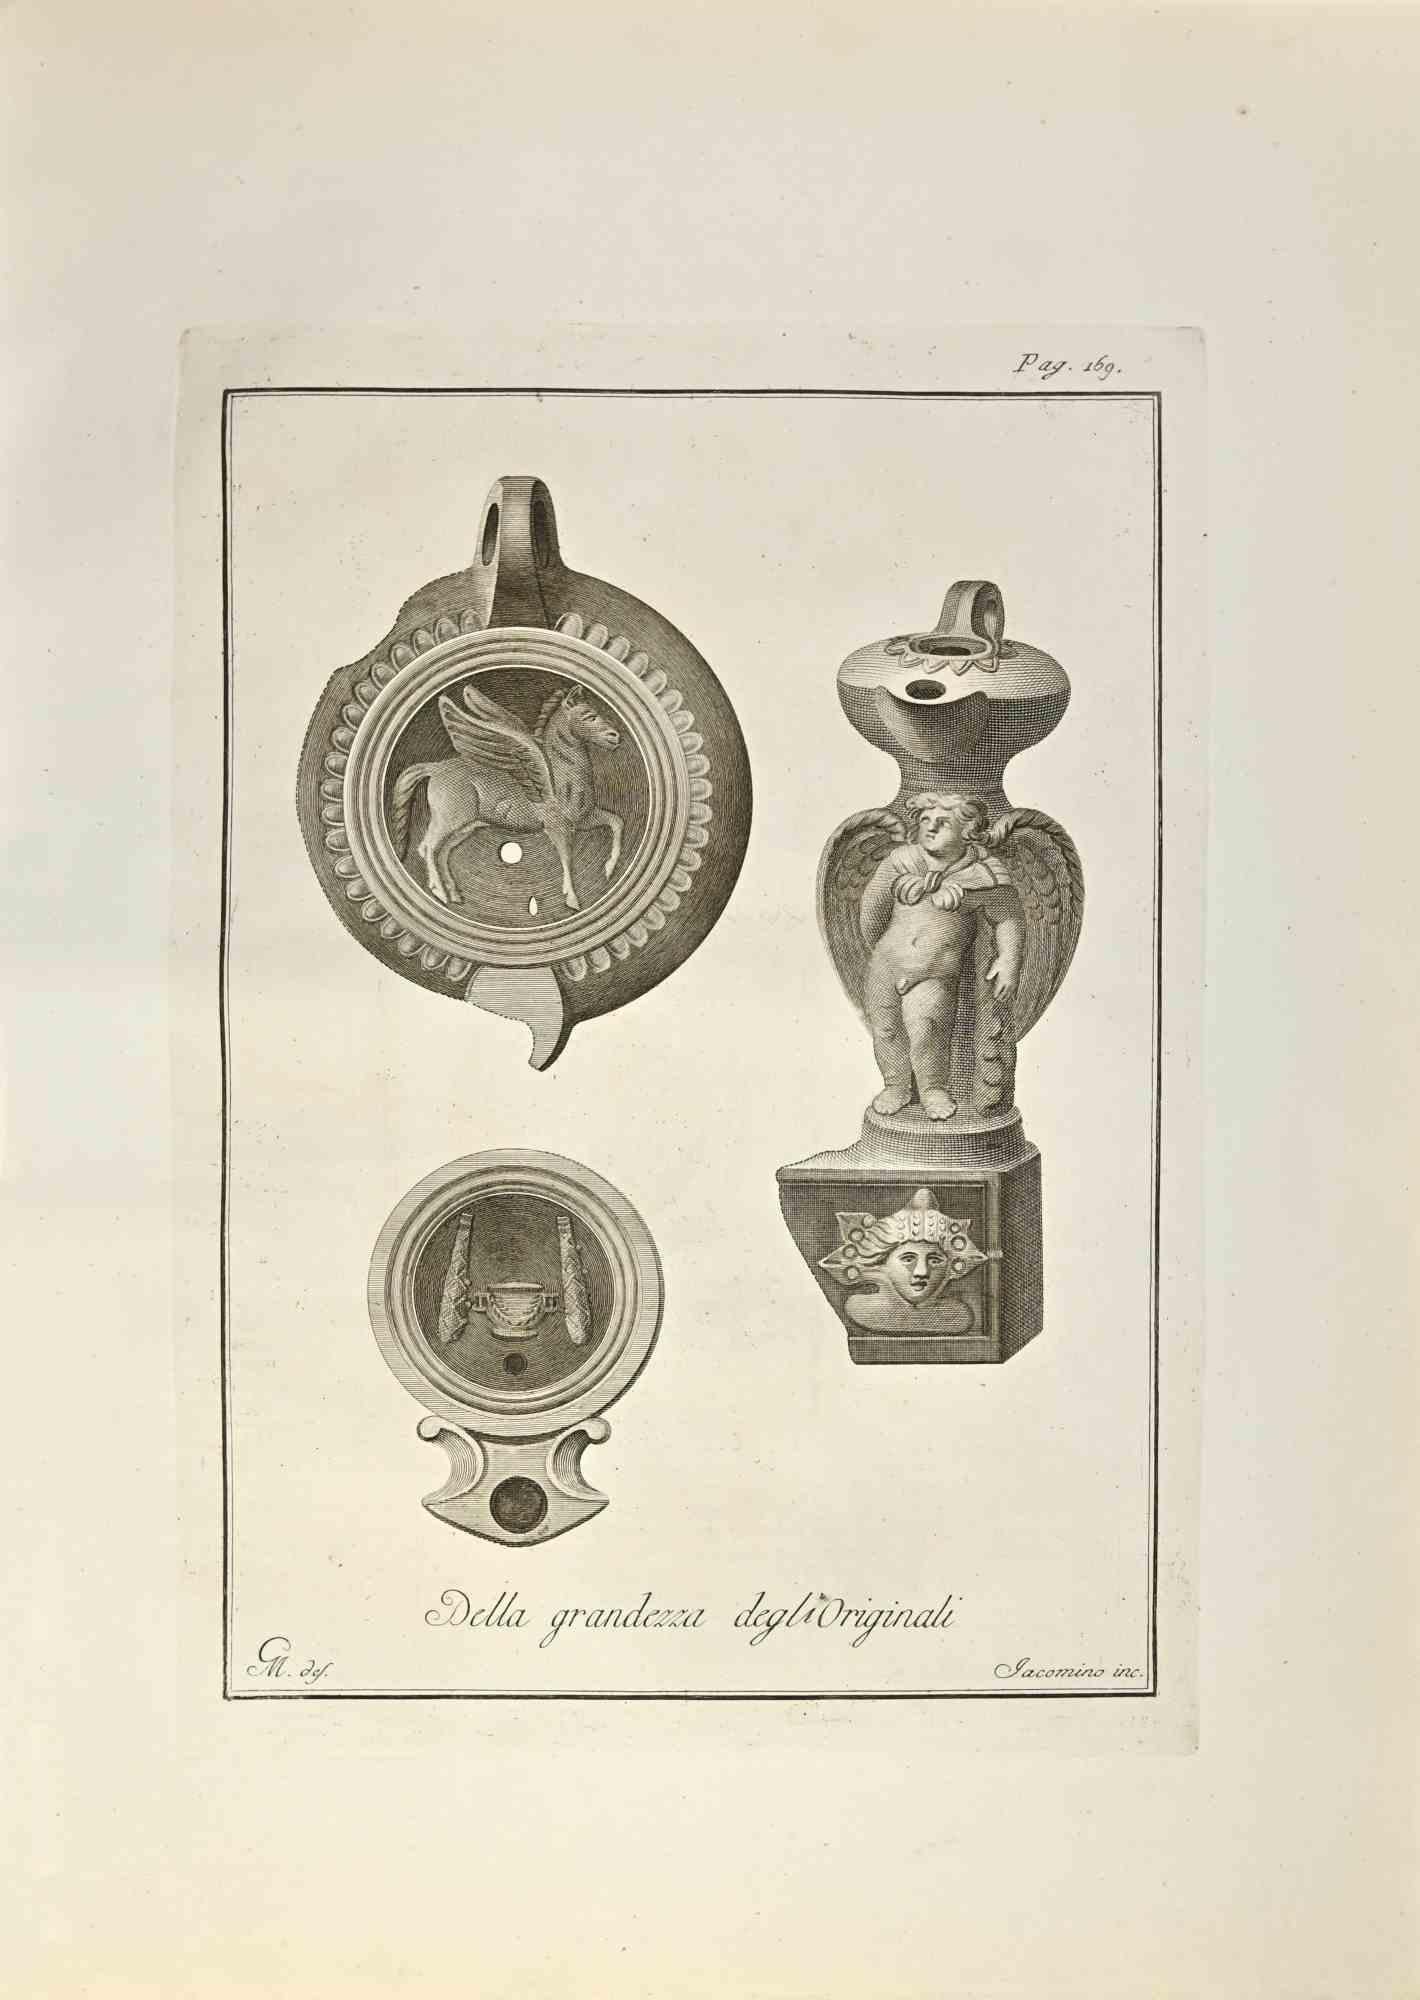 Oil Lamp With Pegasus, Cupid, and Medusa from "Antiquities of Herculaneum" is an etching on paper realized by Marcantonio Iacomino in the 18th Century.

Signed in the plate.

Good conditions.

The etching belongs to the print suite “Antiquities of